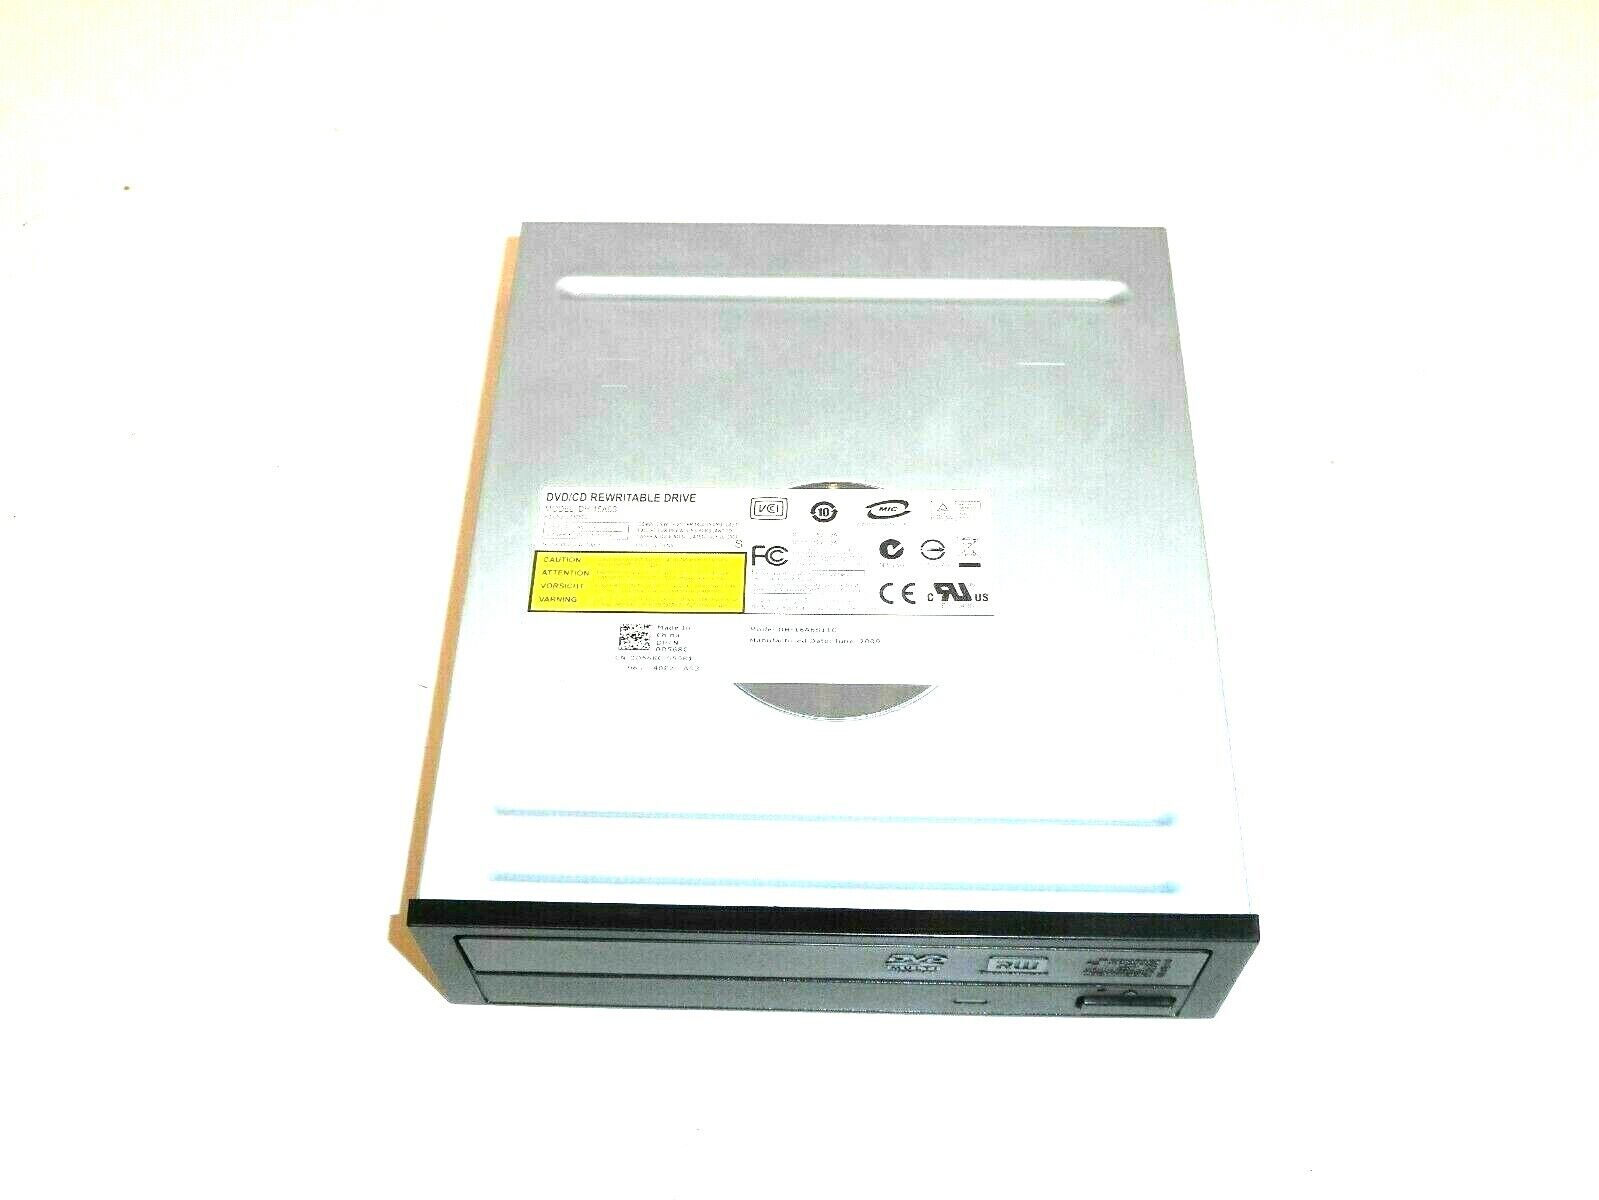 NEW OEM DELL Philips & Lite-on DH-16AAS Computer SATA DVDRW Drive Dell D568C